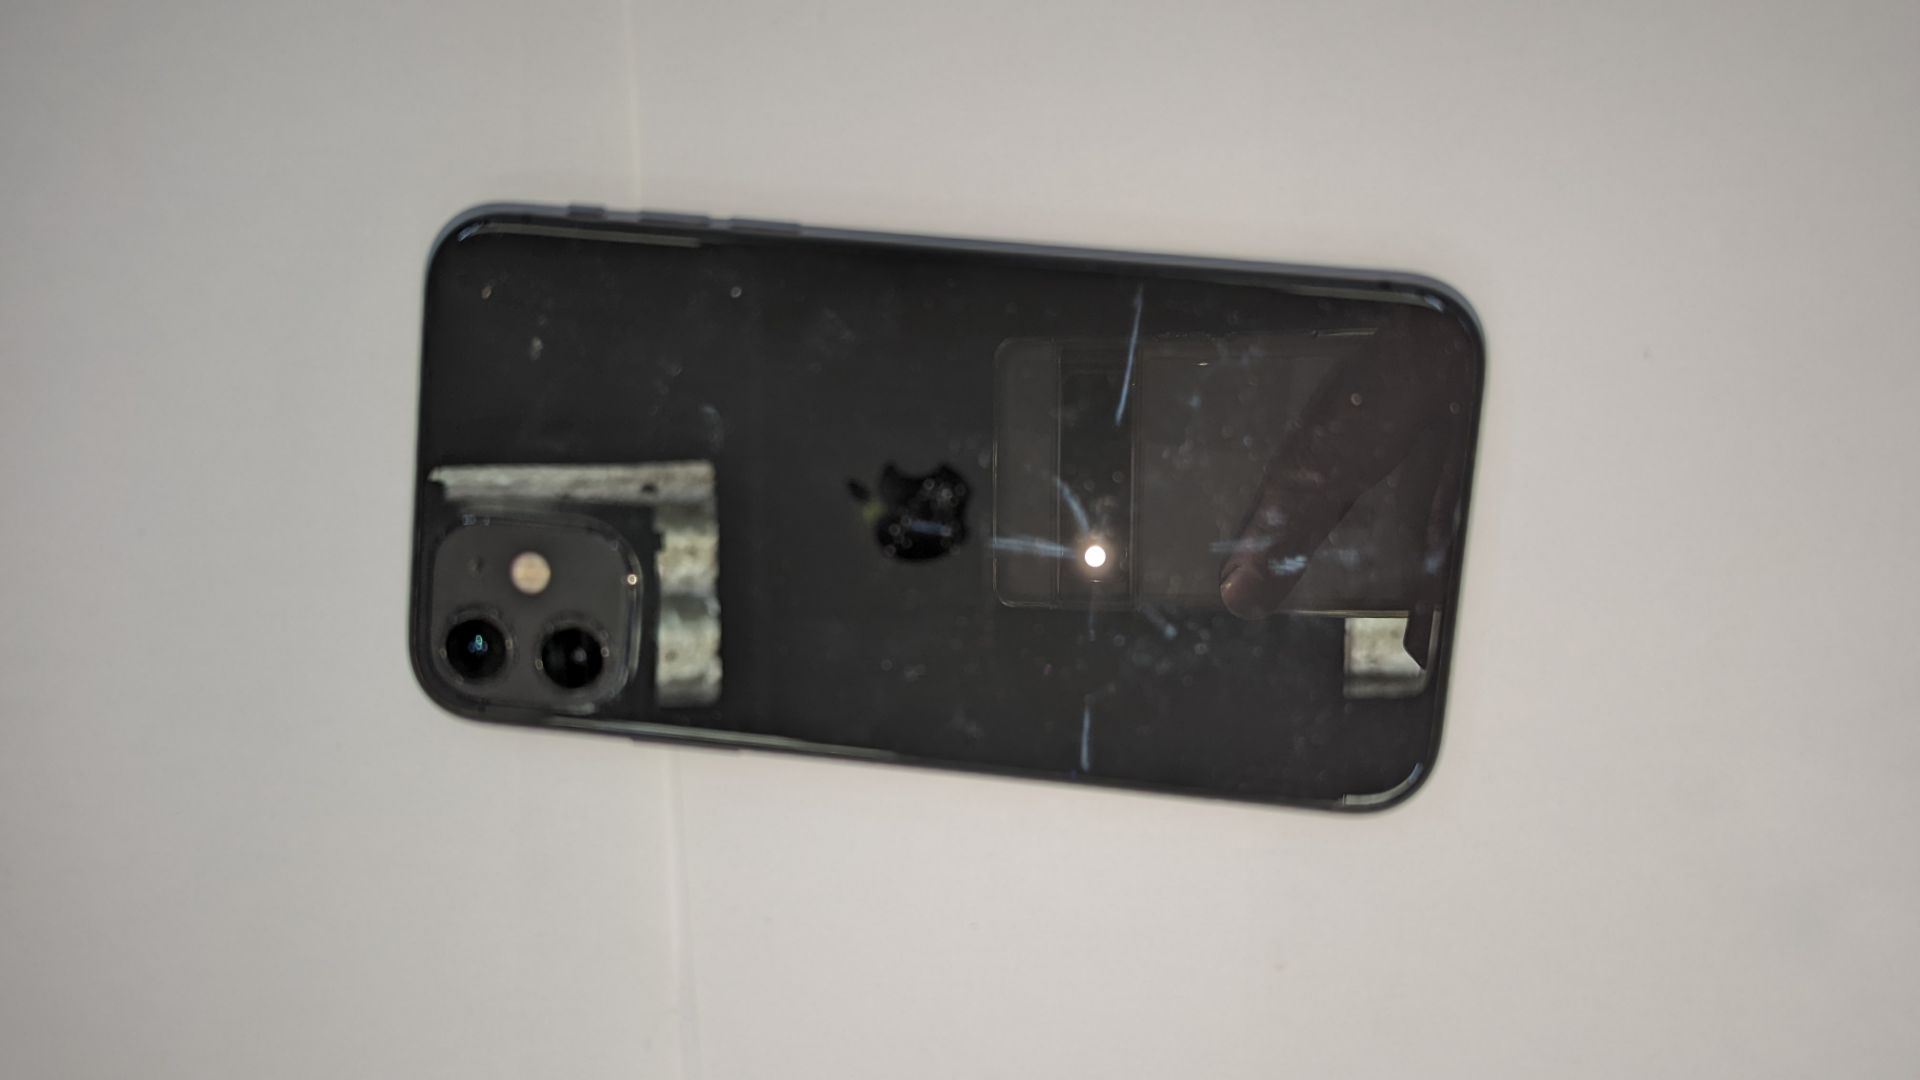 Apple iPhone 11, 64GB capacity, model A2221 (MWLT2B/A). NB1 damage/crack to screen. NB2 no box - Image 6 of 16